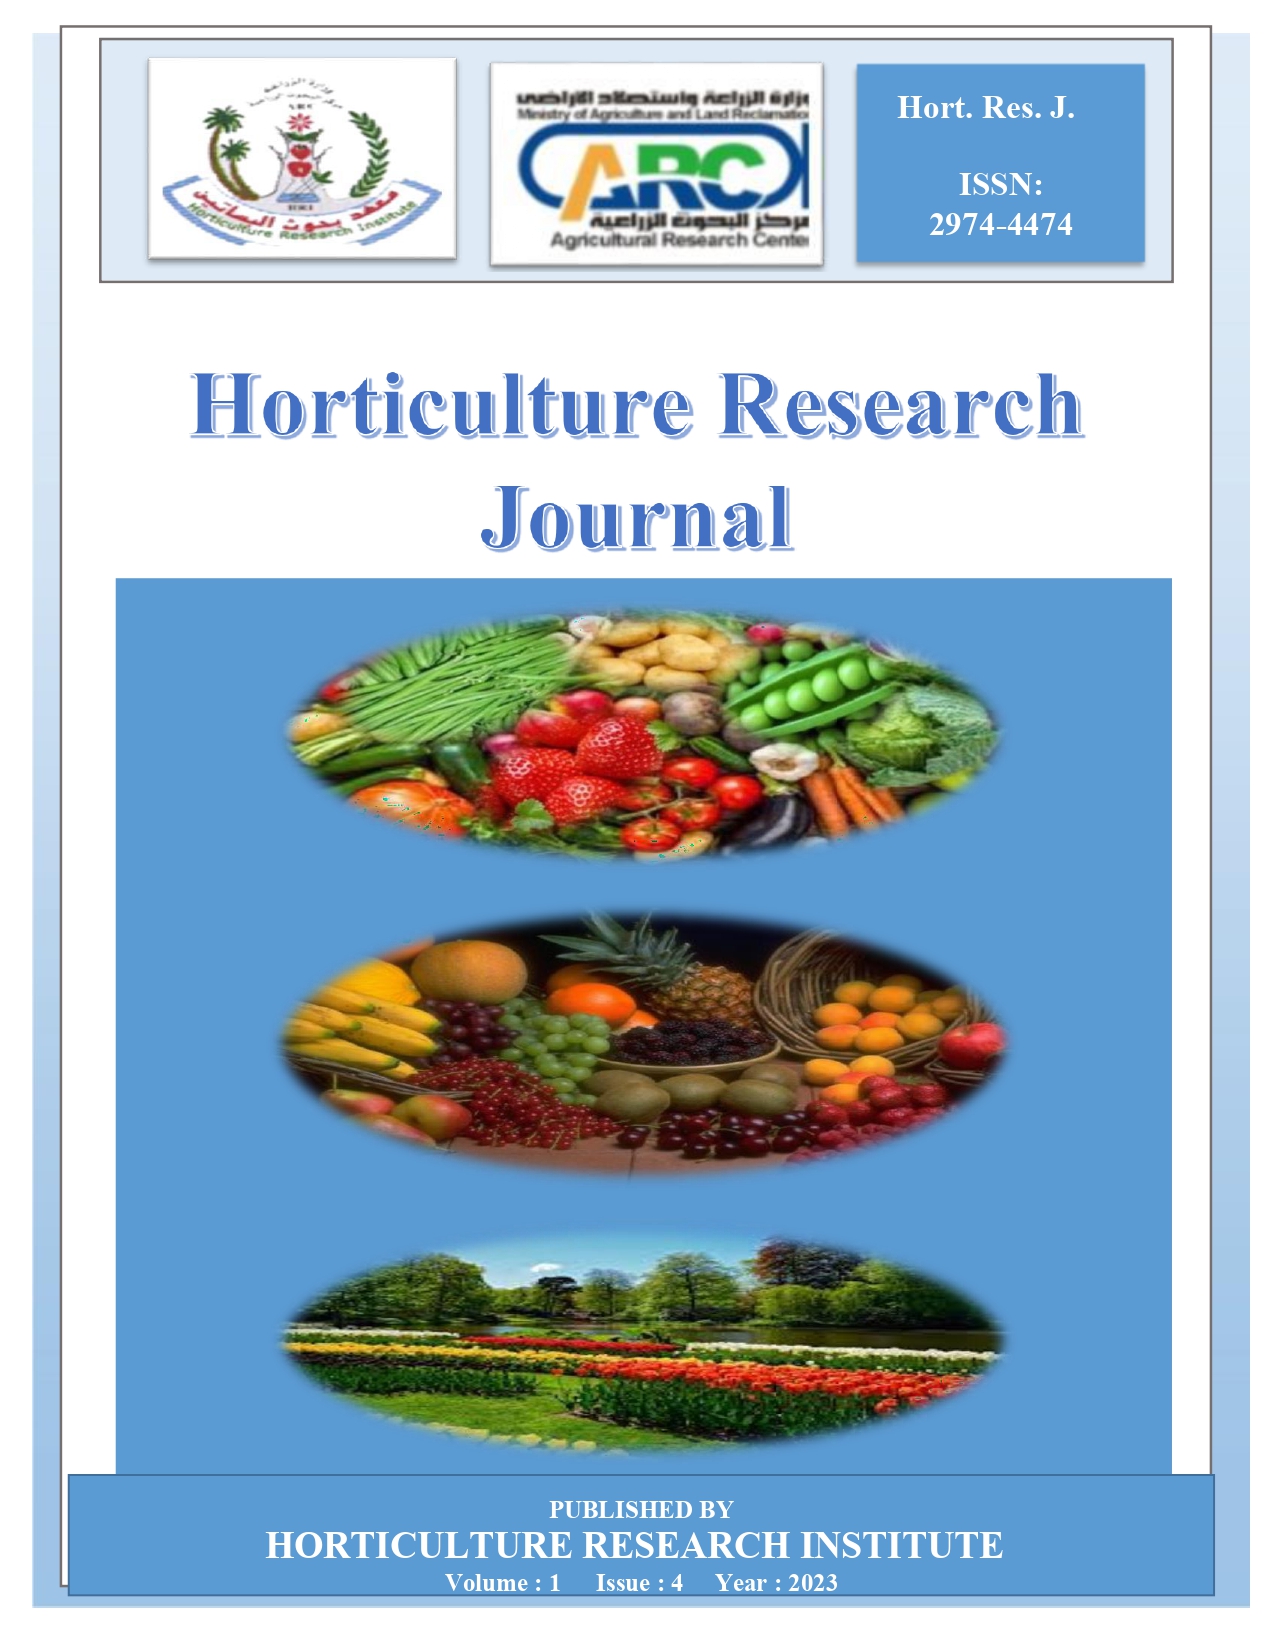 Horticulture Research Journal